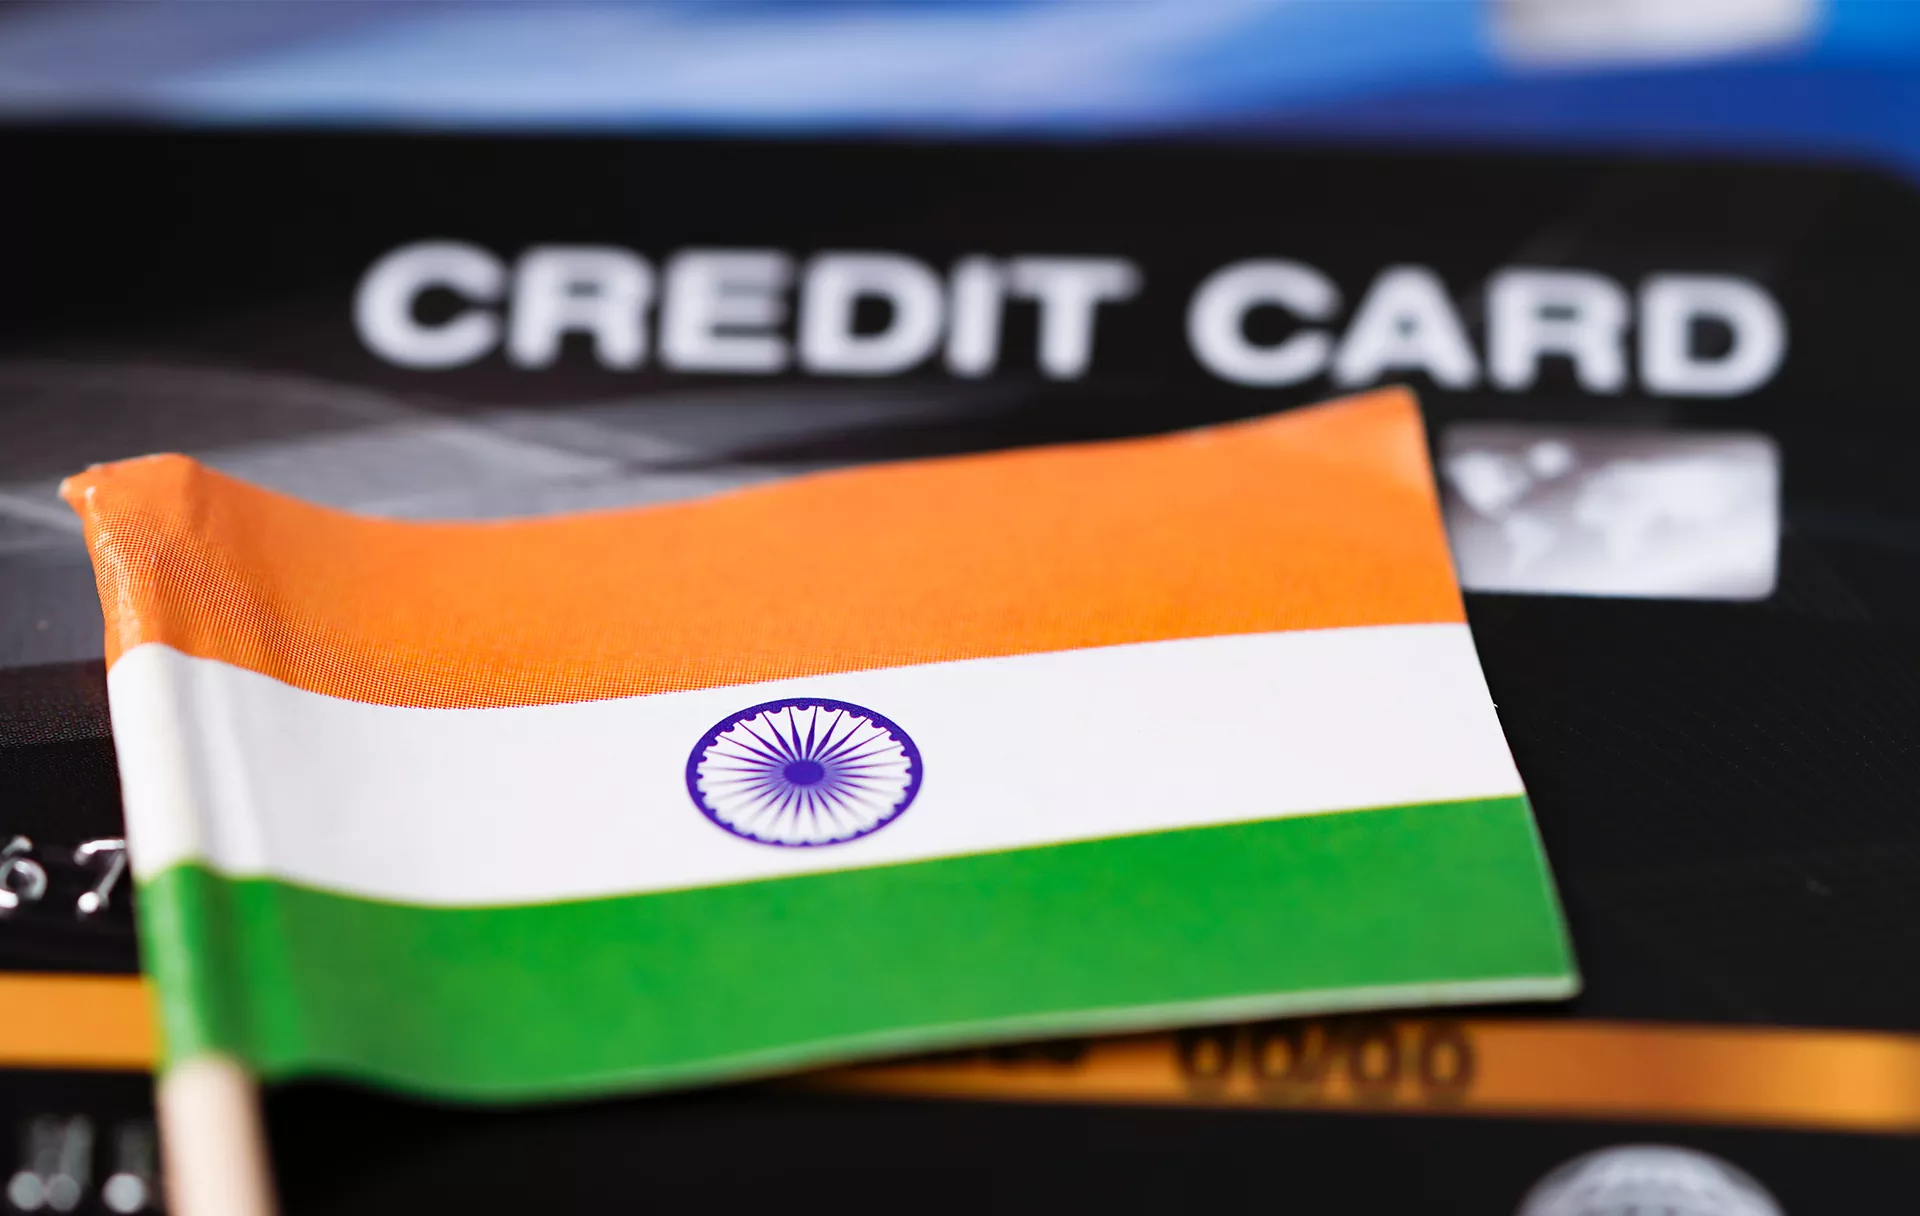 There are all the payment systems that are popular in India.